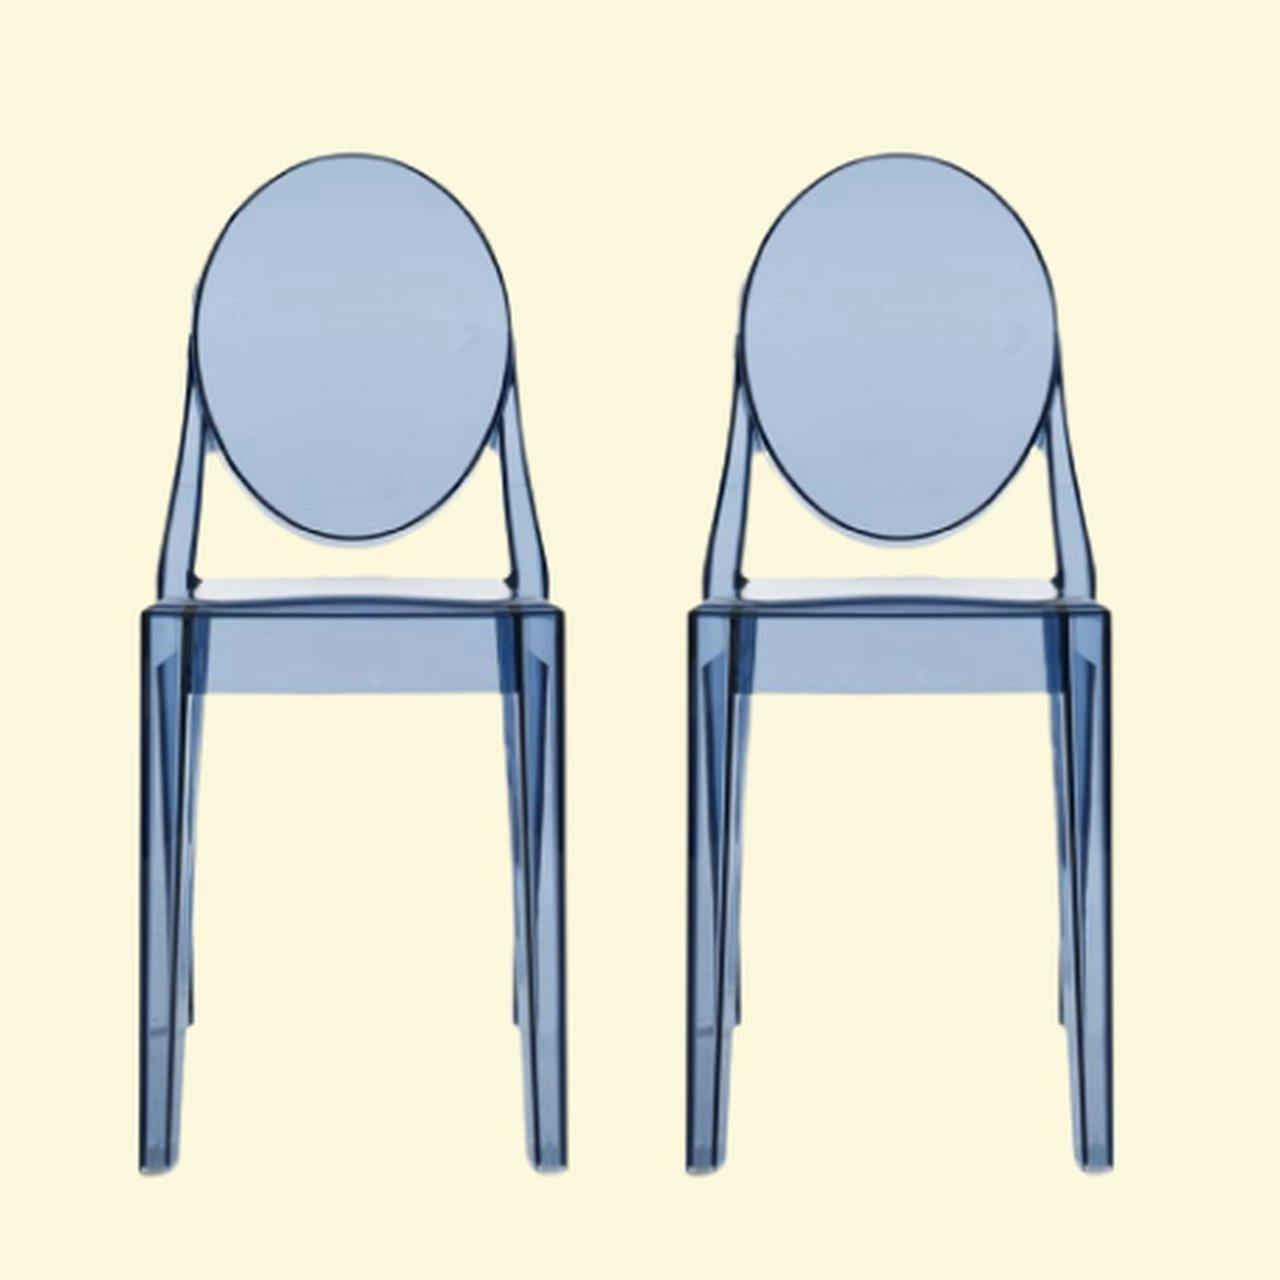 Jan Des Bouvrie Dining chairs